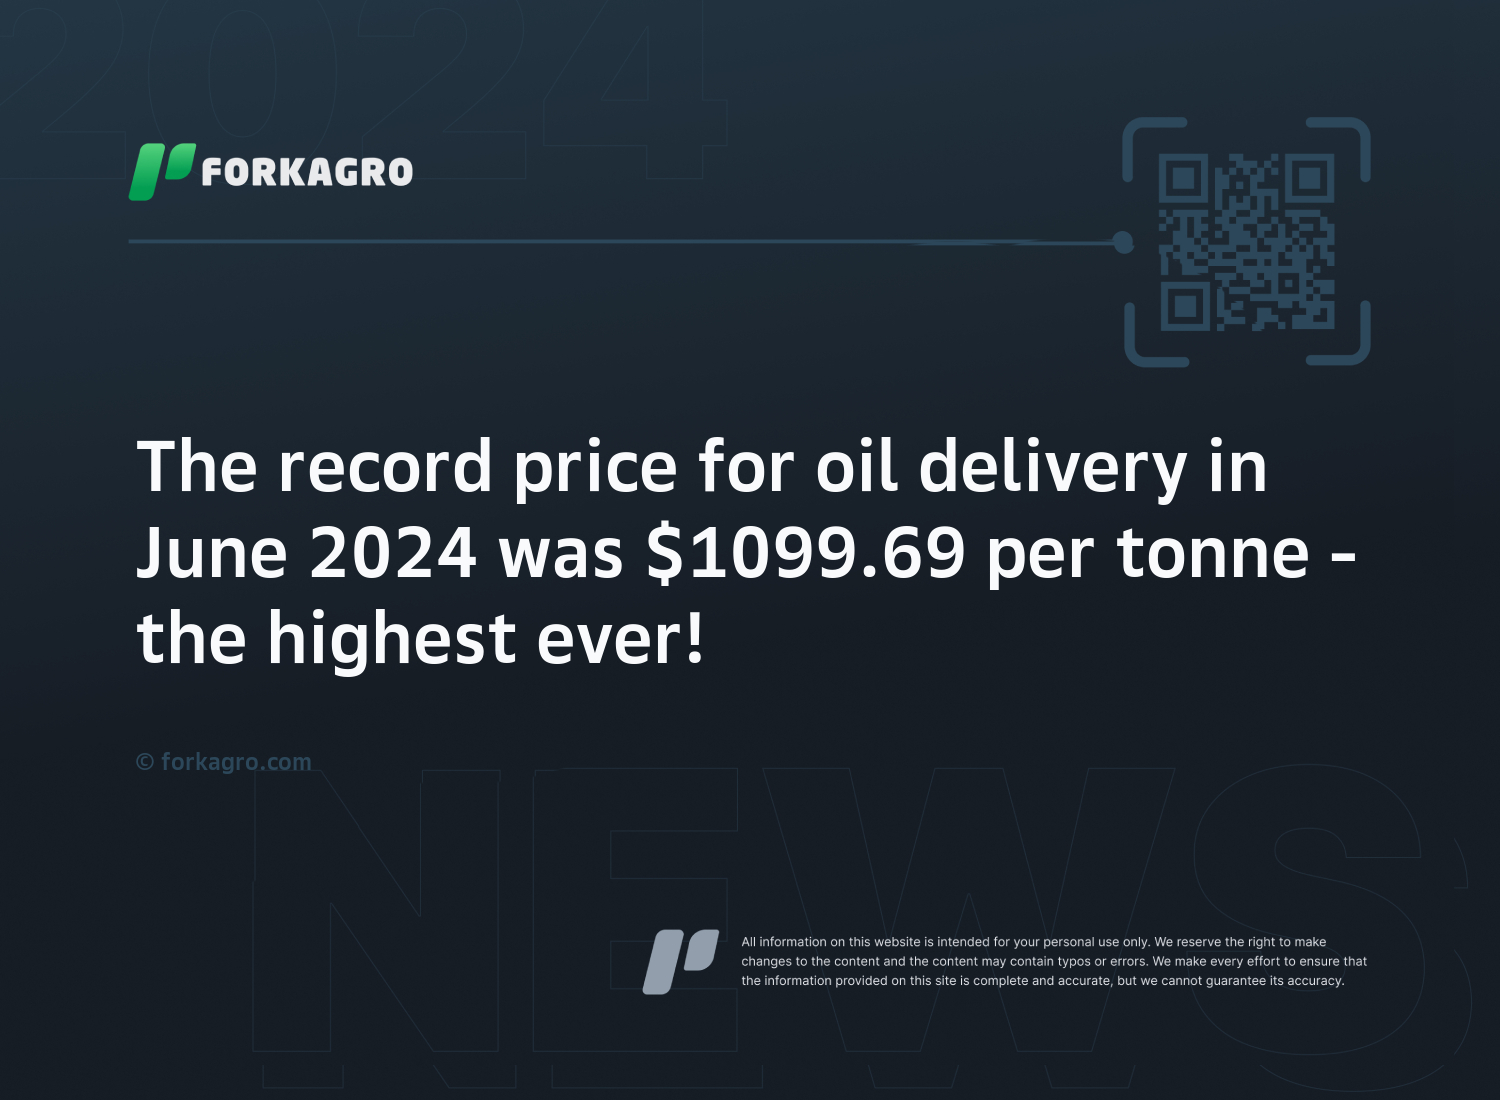 The record price for oil delivery in June 2024 was $1099.69 per tonne - the highest ever!